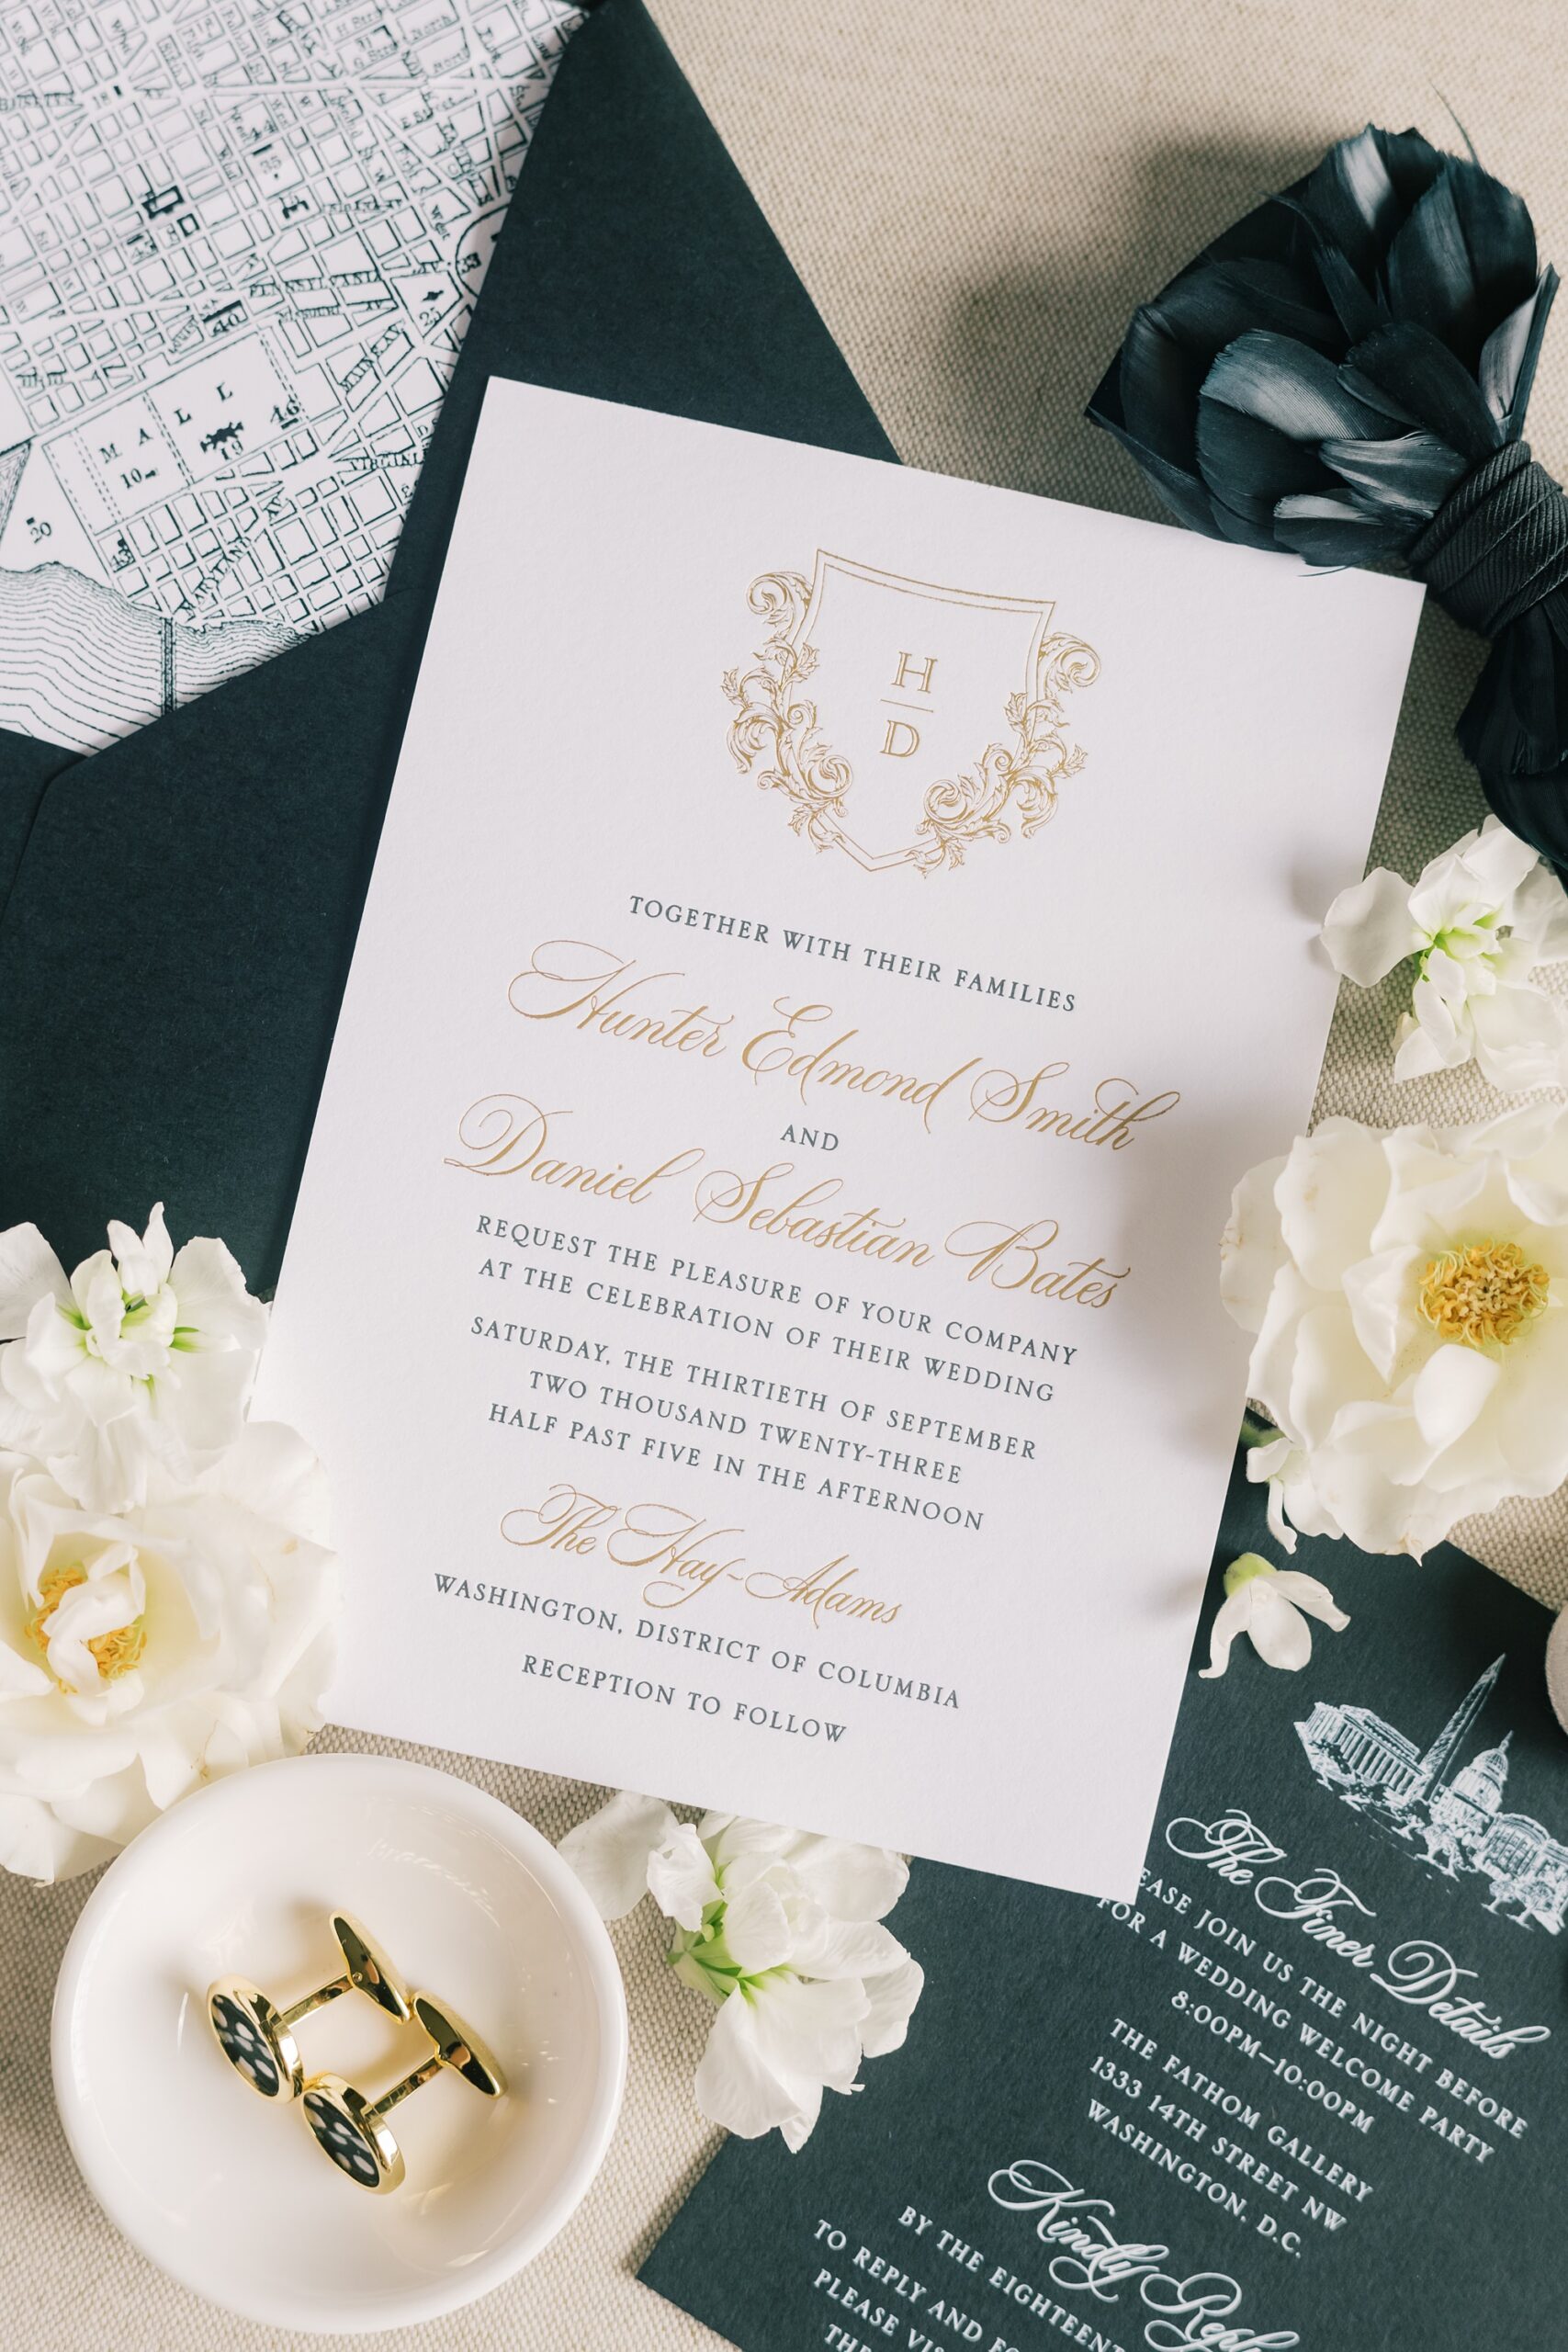 classic black, white, and gold invitation suite for DC wedding